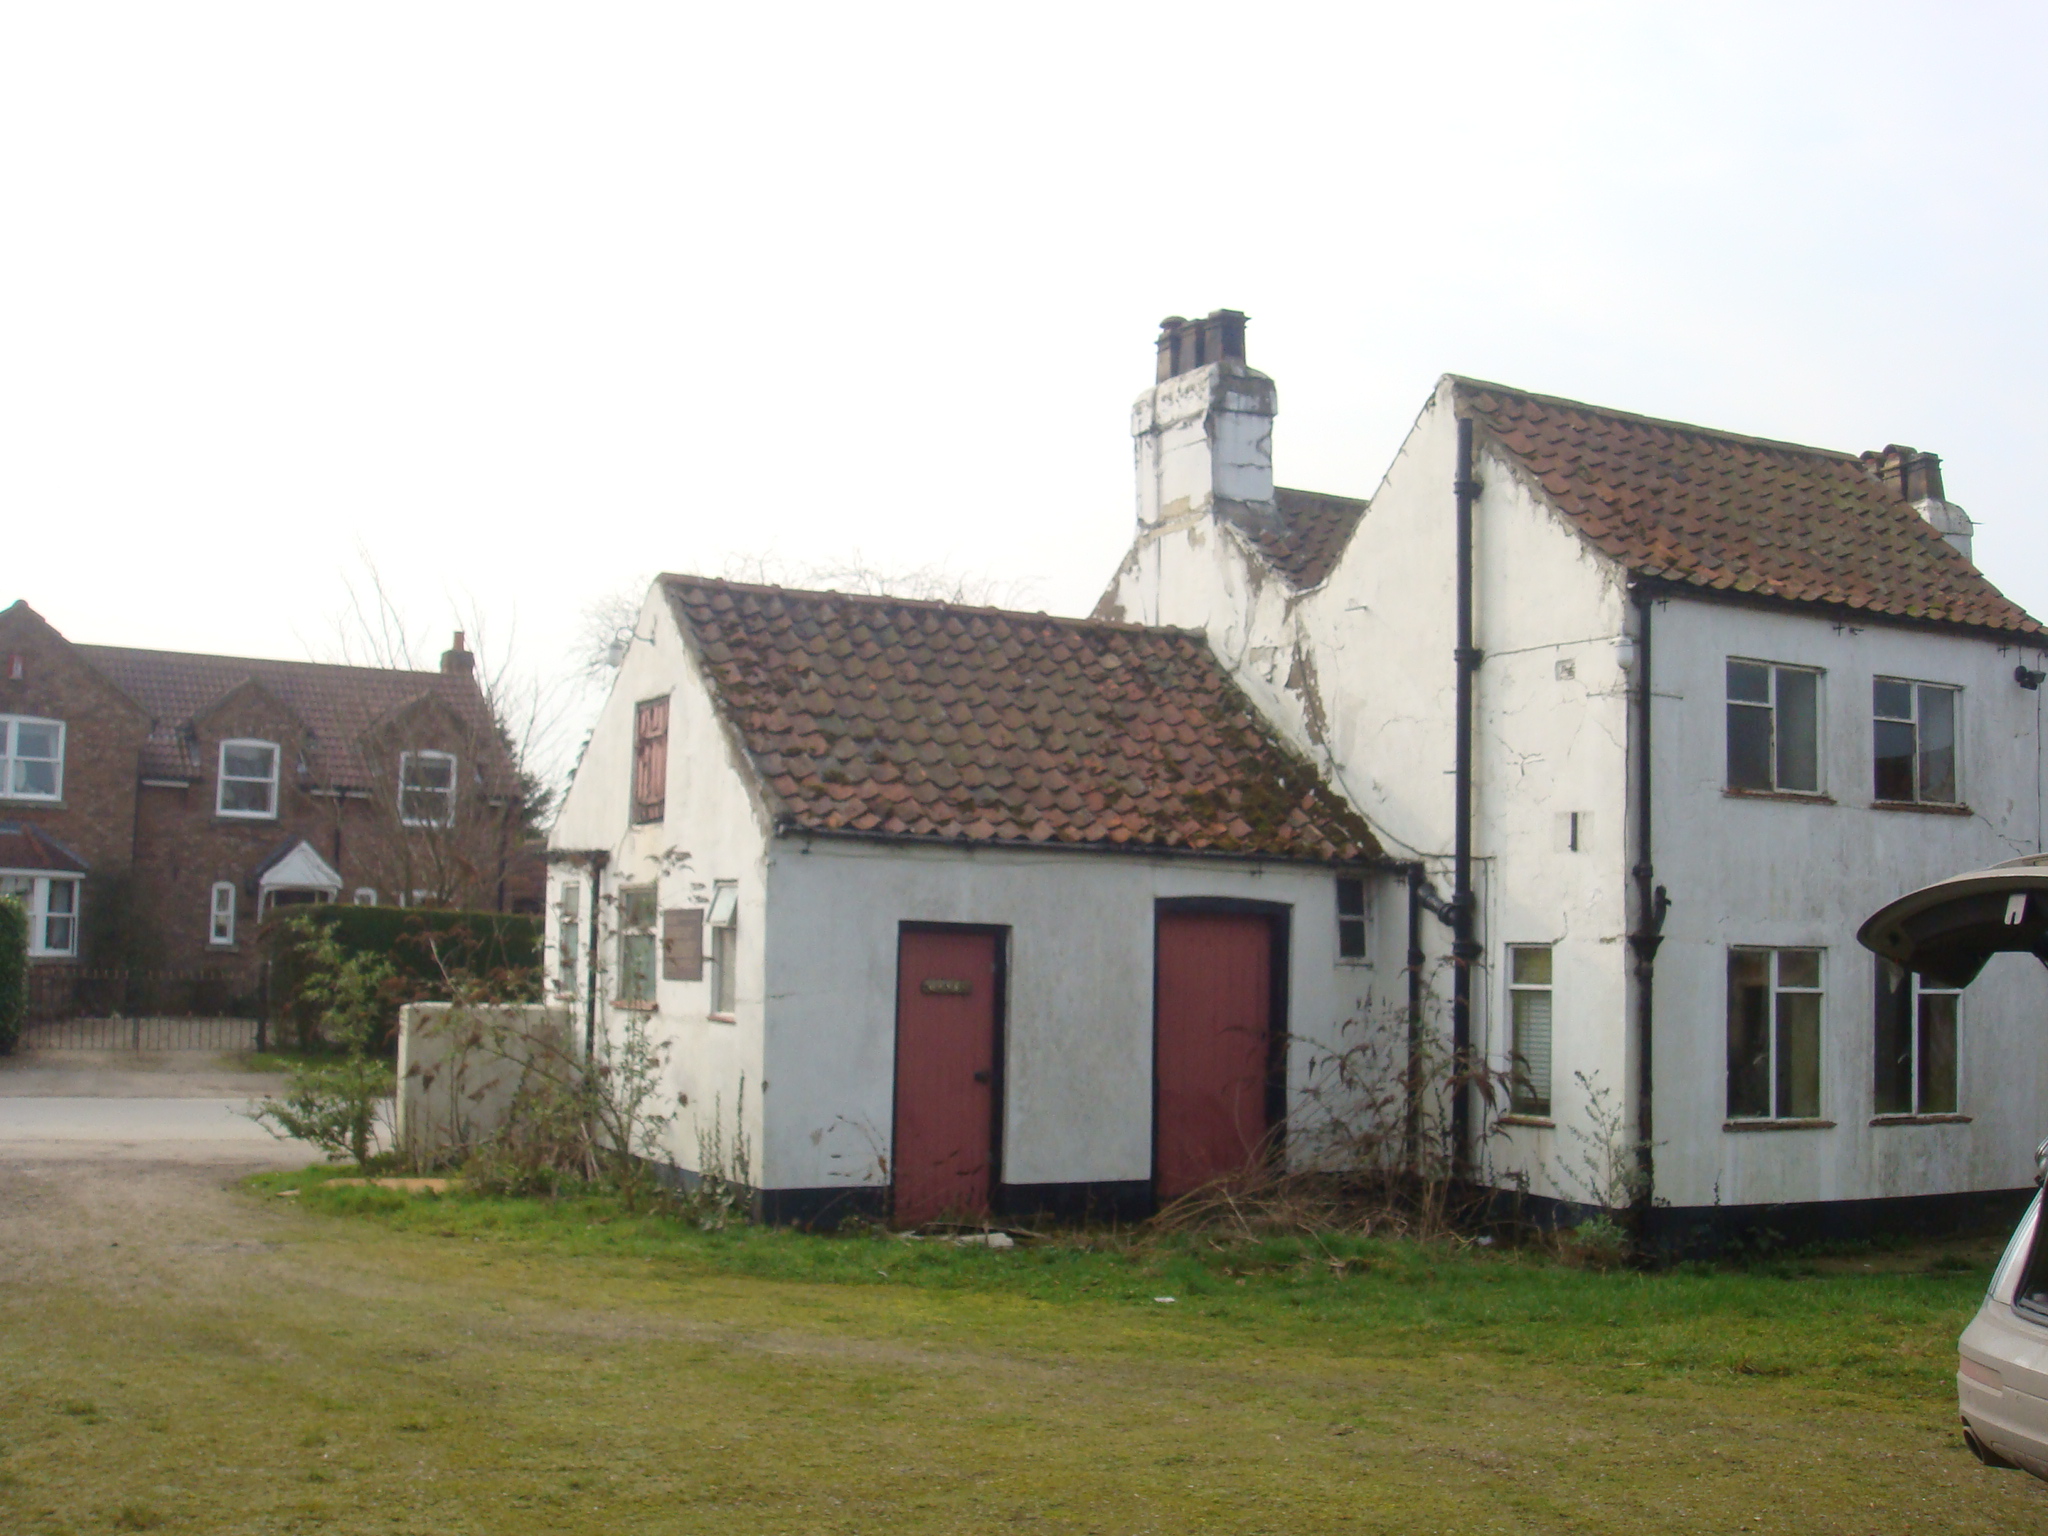 Rear of Neglected Pub Prior to Redevelopment